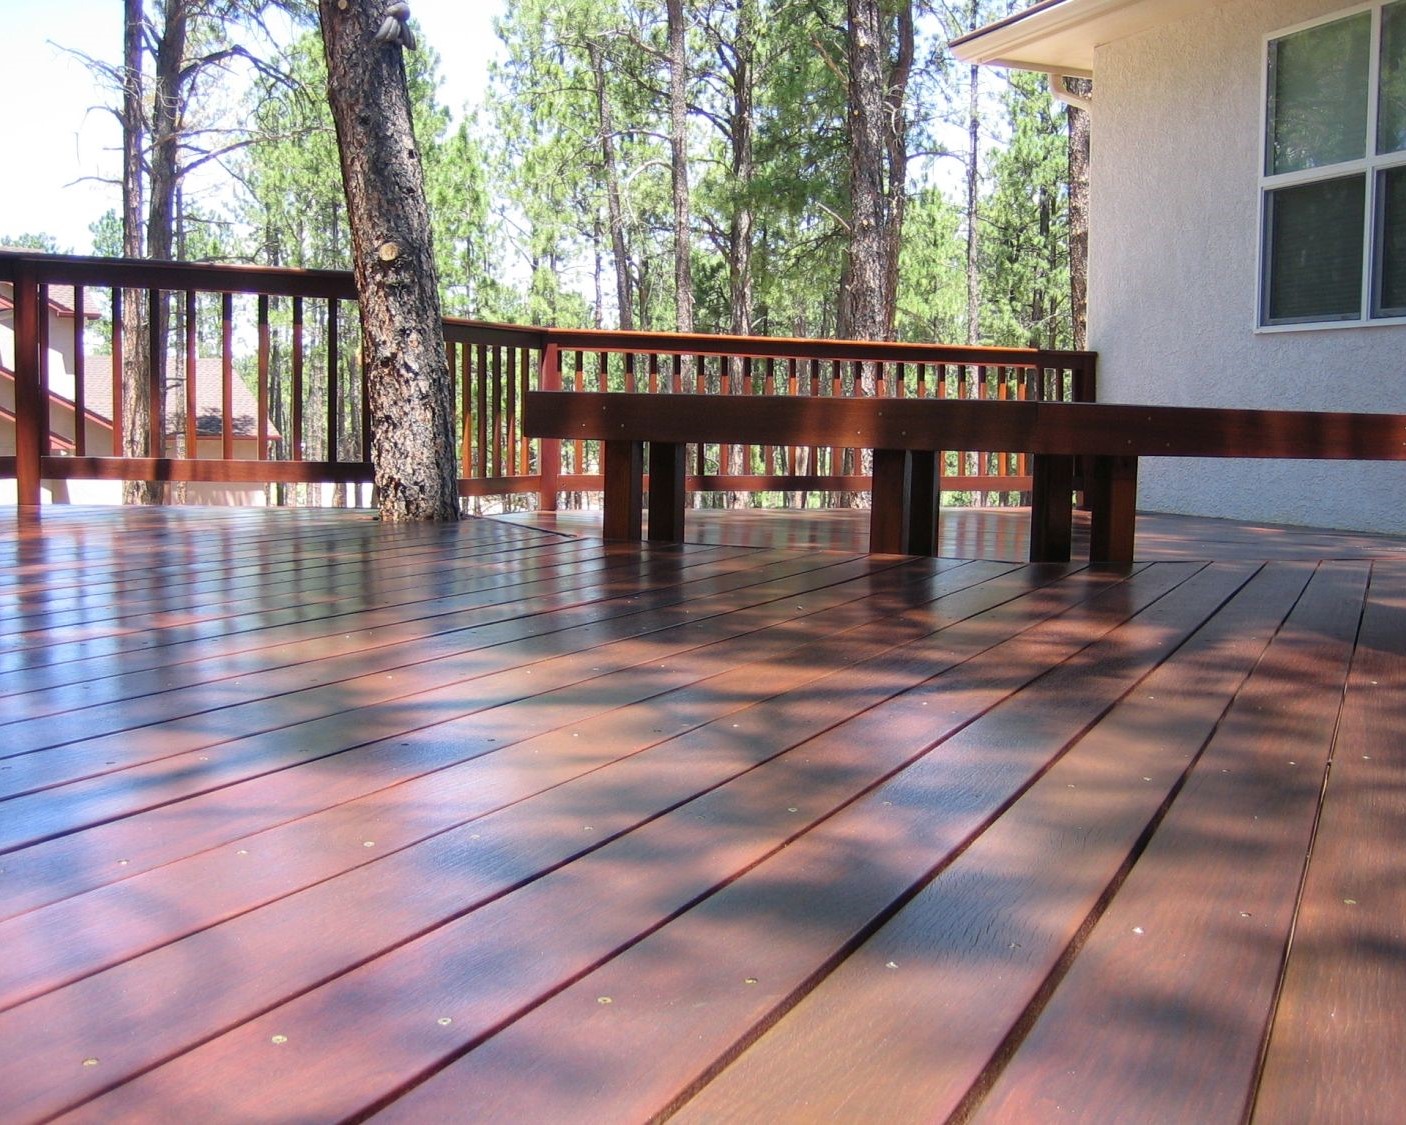 Hardwood deck built using Ipe wood. The railing and a custom bench were also built from Ipe.